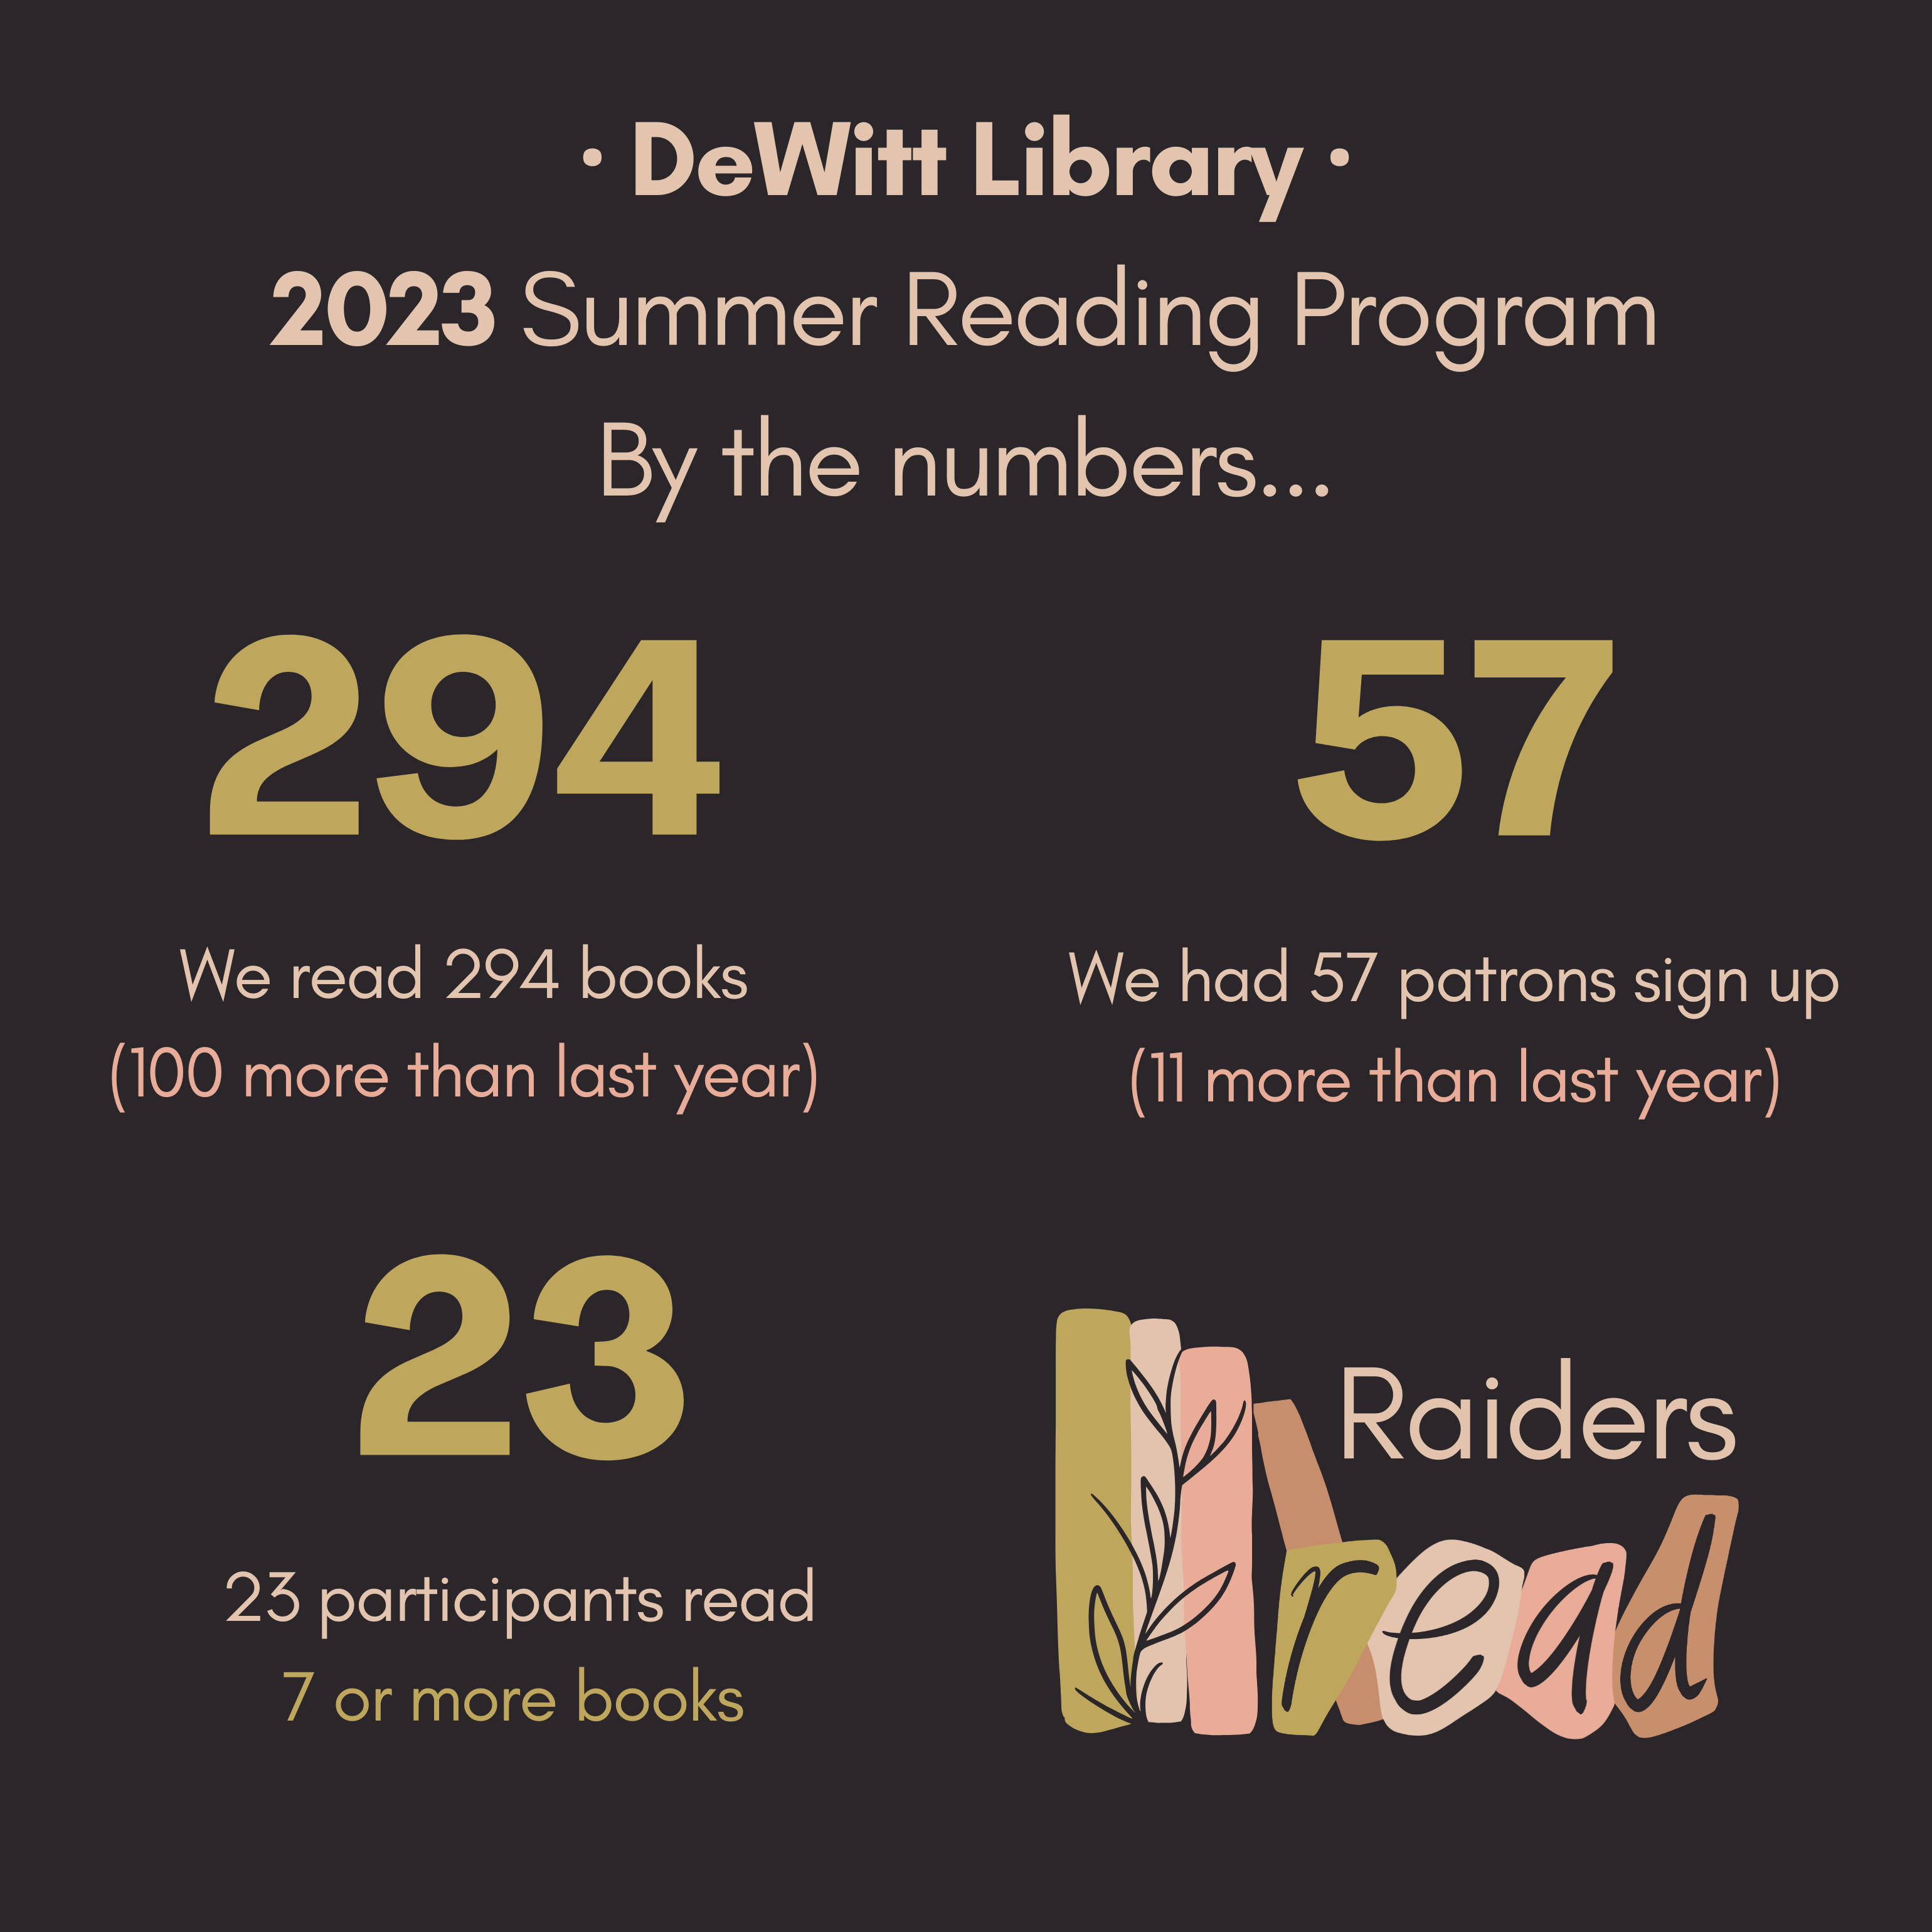 DeWitt Library 2023 Summer Reading Program By the numbers... We read 294 books (100 more than last year); We had 57 patrons sign up (11 more than last year); 23 participants read  7 or more books.